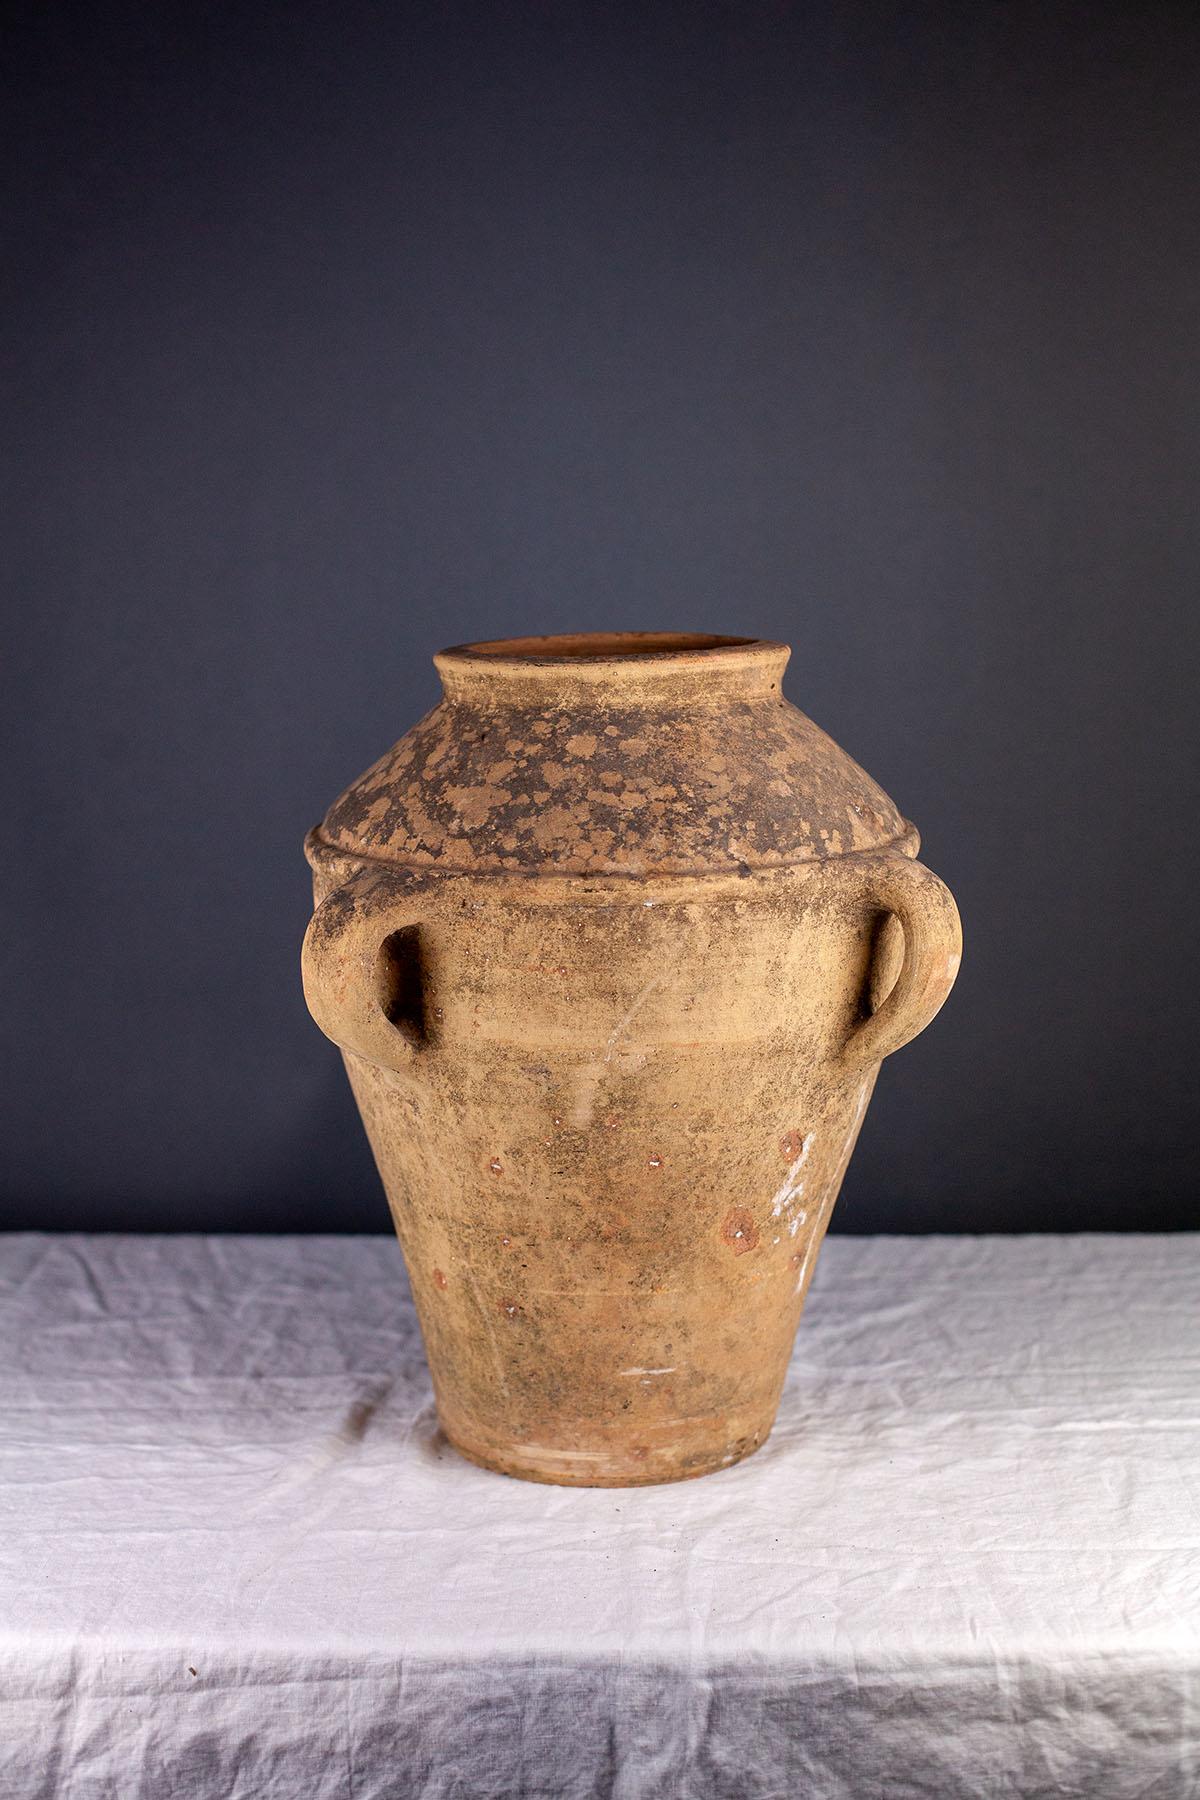 Fleurdetroit presents for your consideration this lovely, English, terra-cotta, vessel with a marvelous patina. Equally as charming in an interior or on an exterior terrace, this vessel has handsome energy and a beautiful surface.